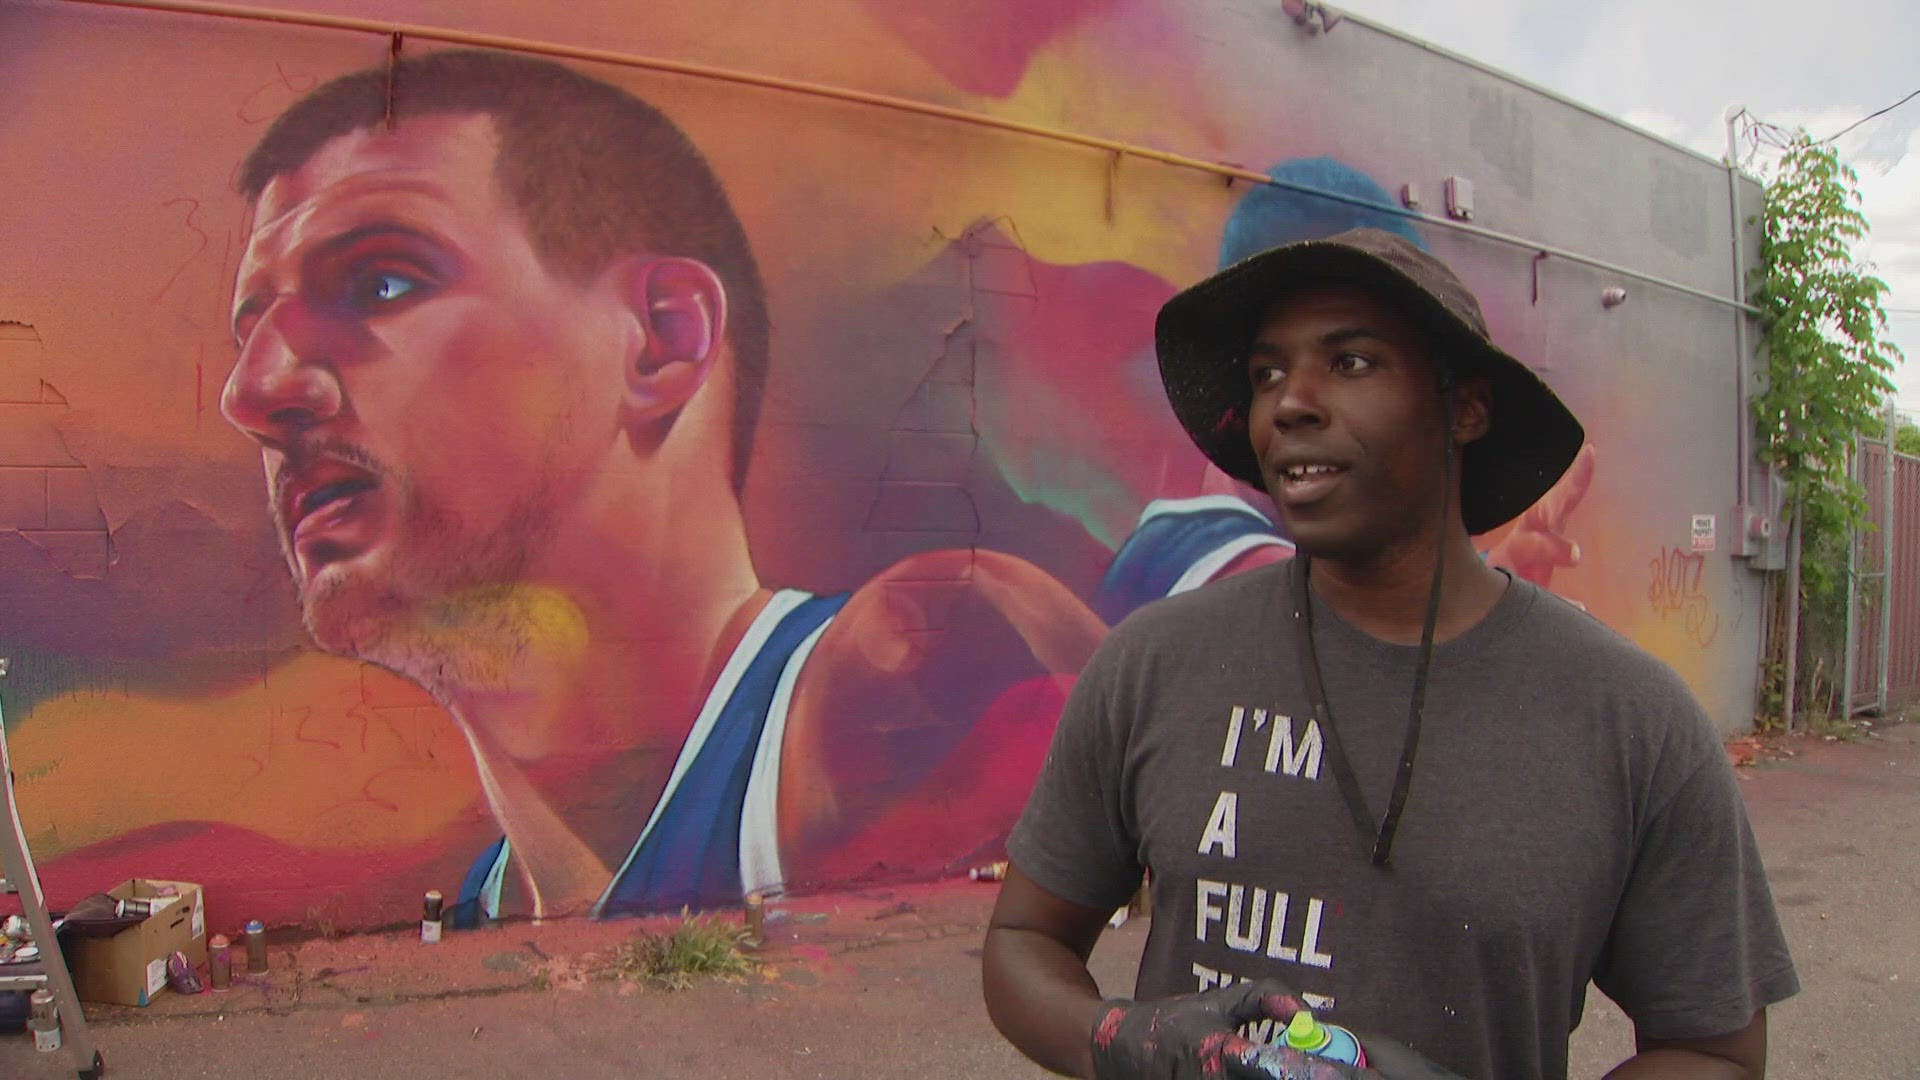 Local Denver artist, Detour Evans, says he wanted to do this piece to celebrate the Nuggets making the finals.